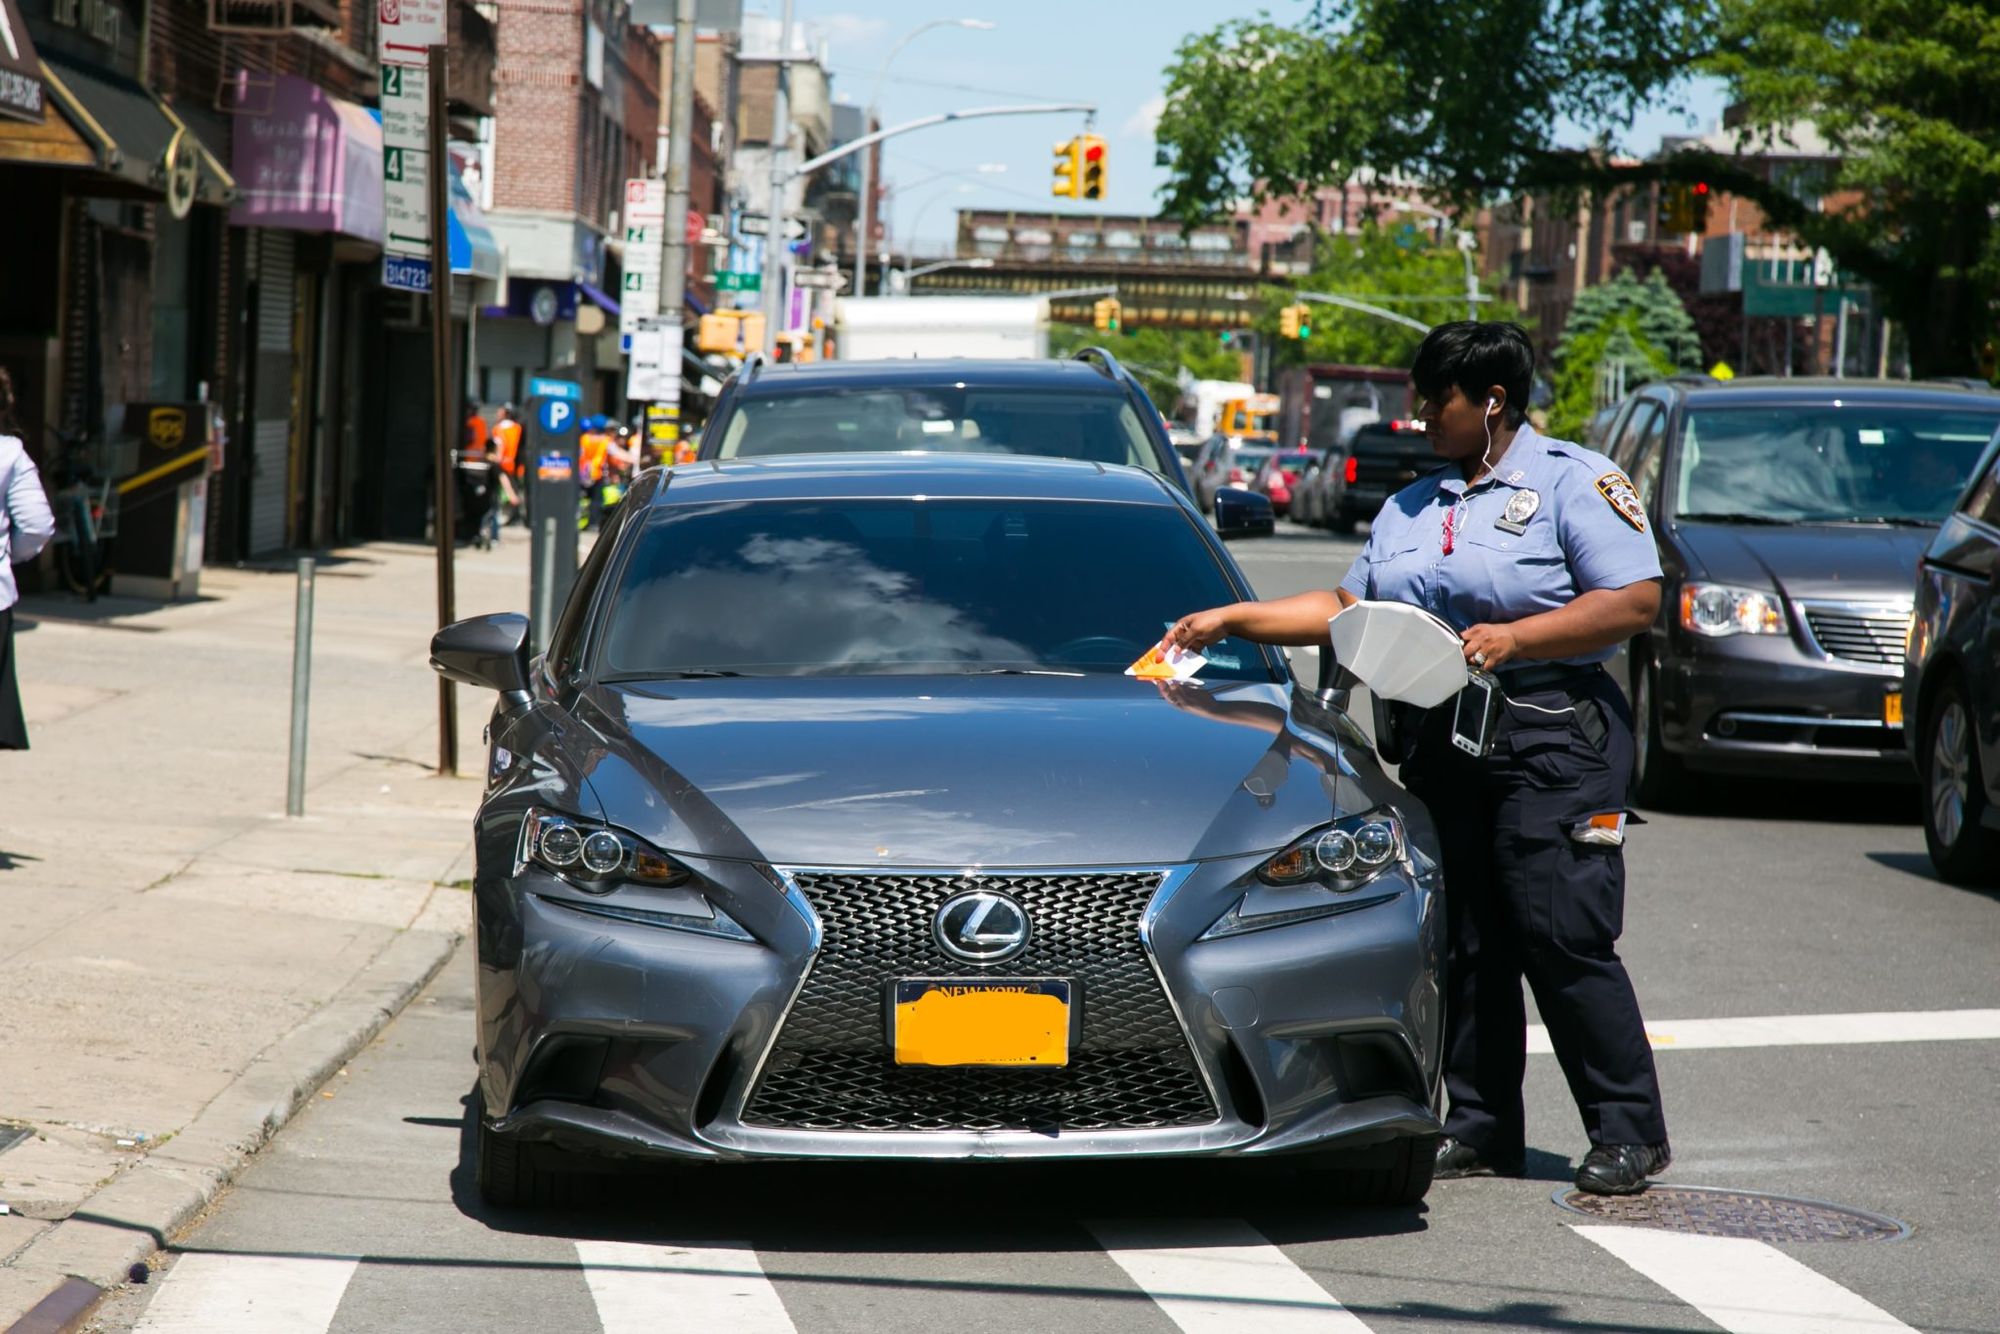 TicketWiper: A New App To Help Fight NYC Parking Tickets